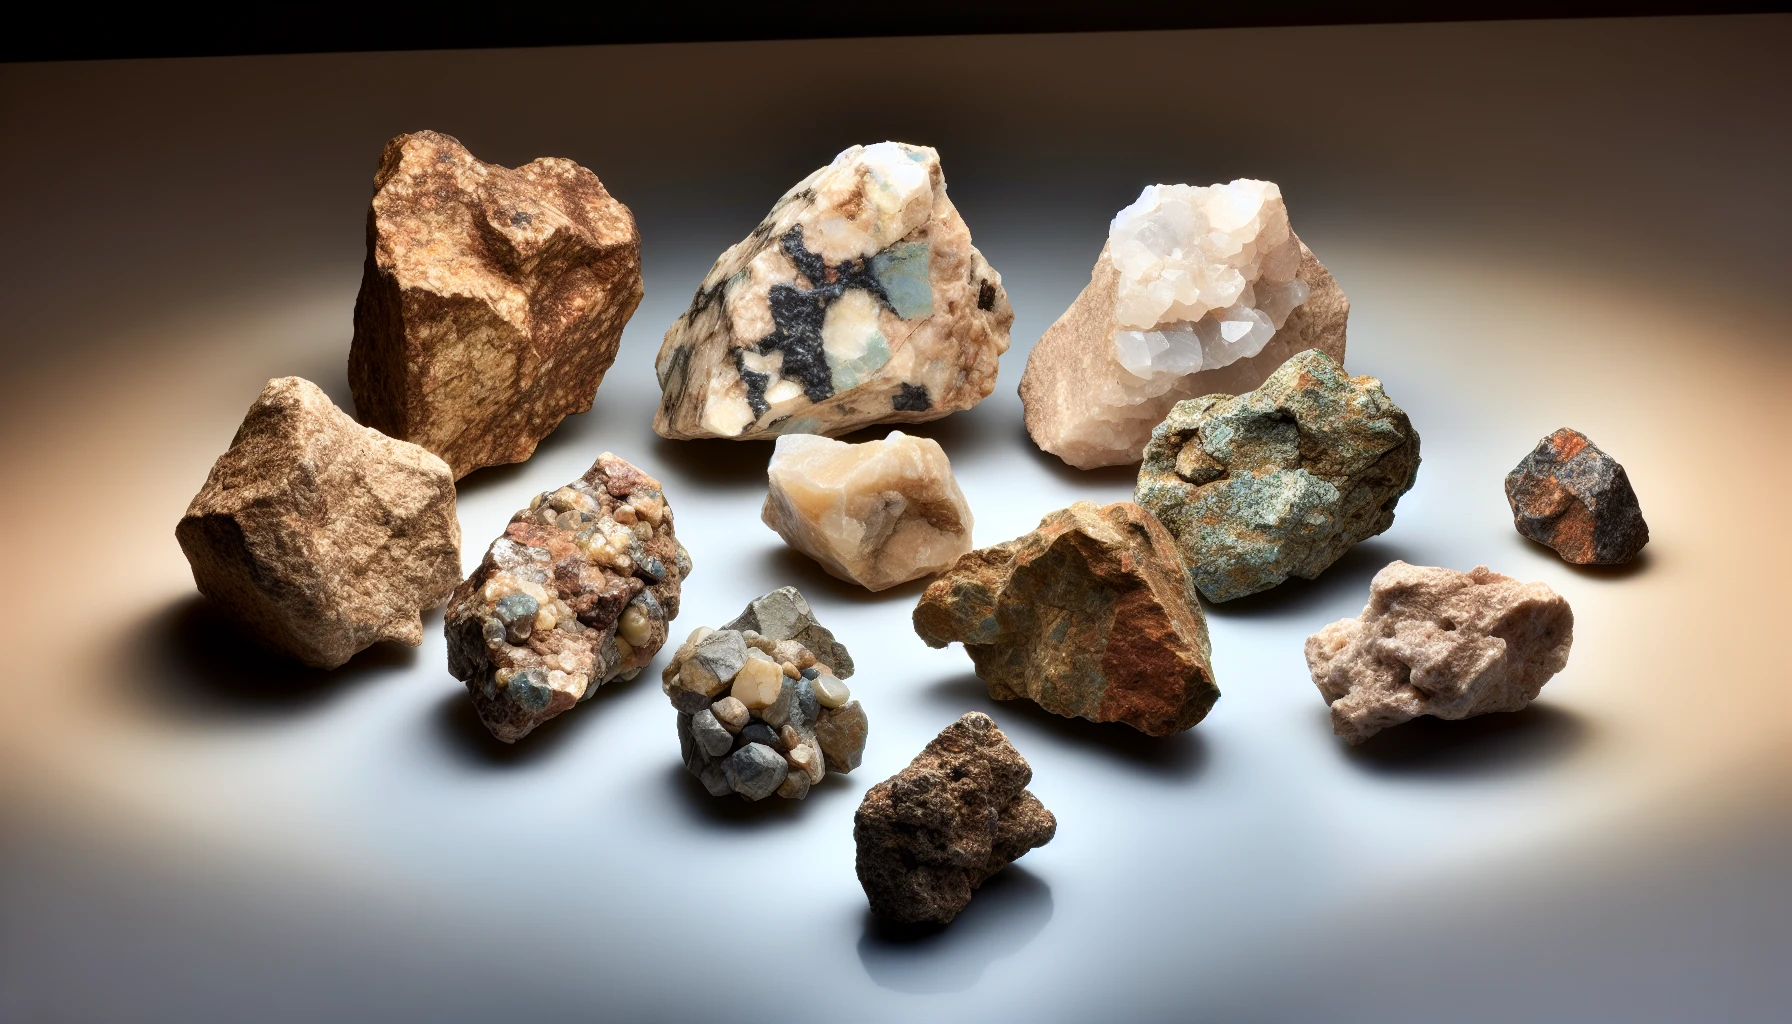 Photo of various kimberlite rocks showing different colors and textures